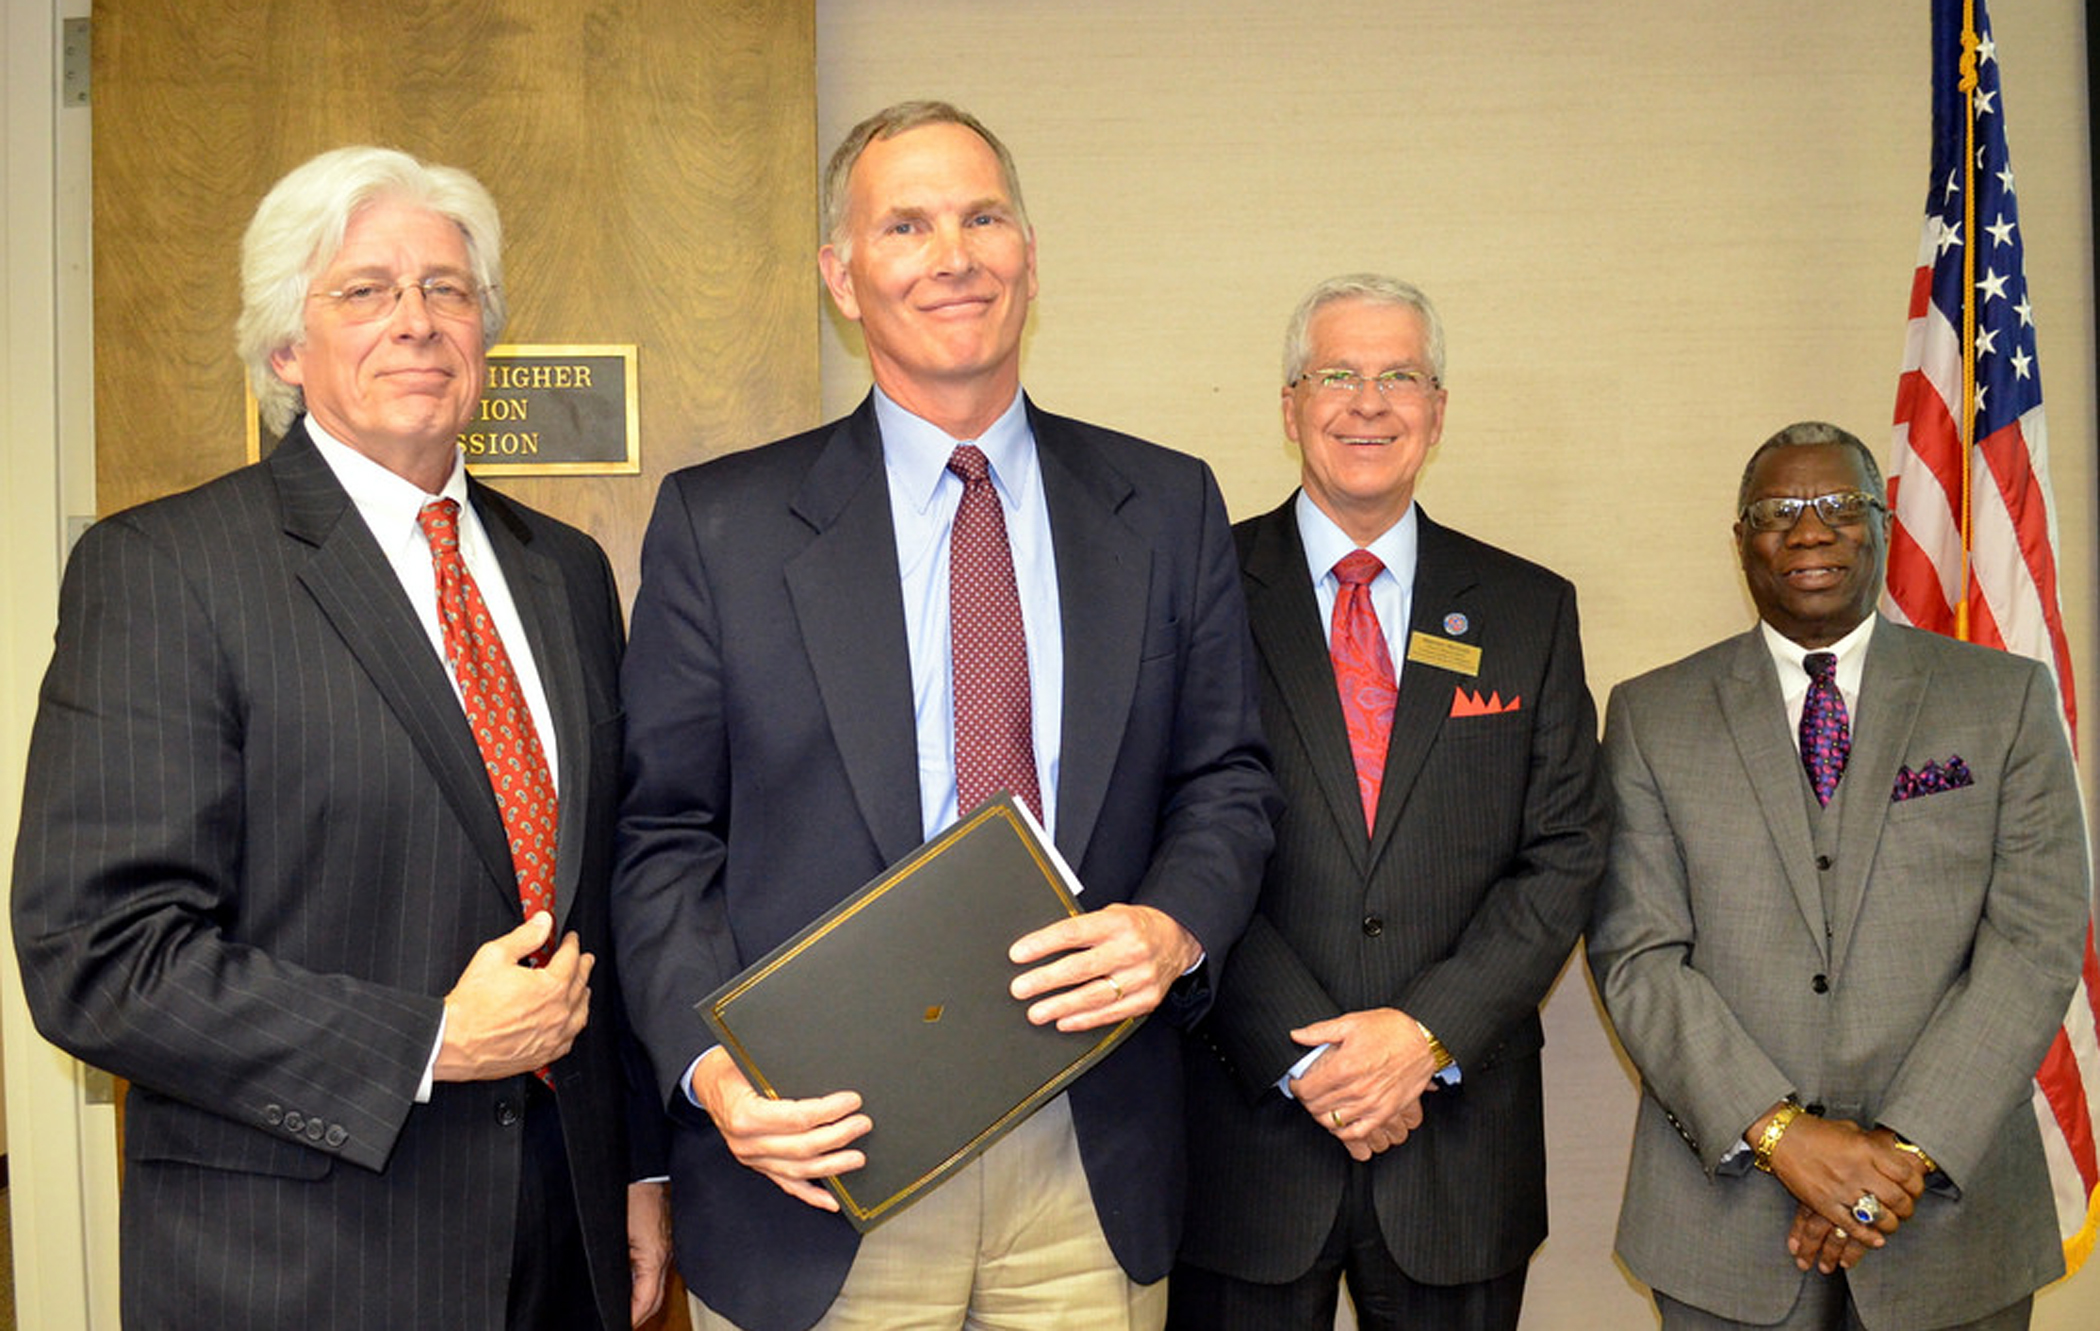 Roane State’s Brad Fox, second from left, is presented with the 2014 Harold Love Outstanding Community Involvement Award by, from left, Dr. Richard G. Rhoda (Tennessee Higher Education Commission), Dr. Warren Nichols (Tennessee Board of Regents), and Cato Johnson (Tennessee Higher Education Commission). 